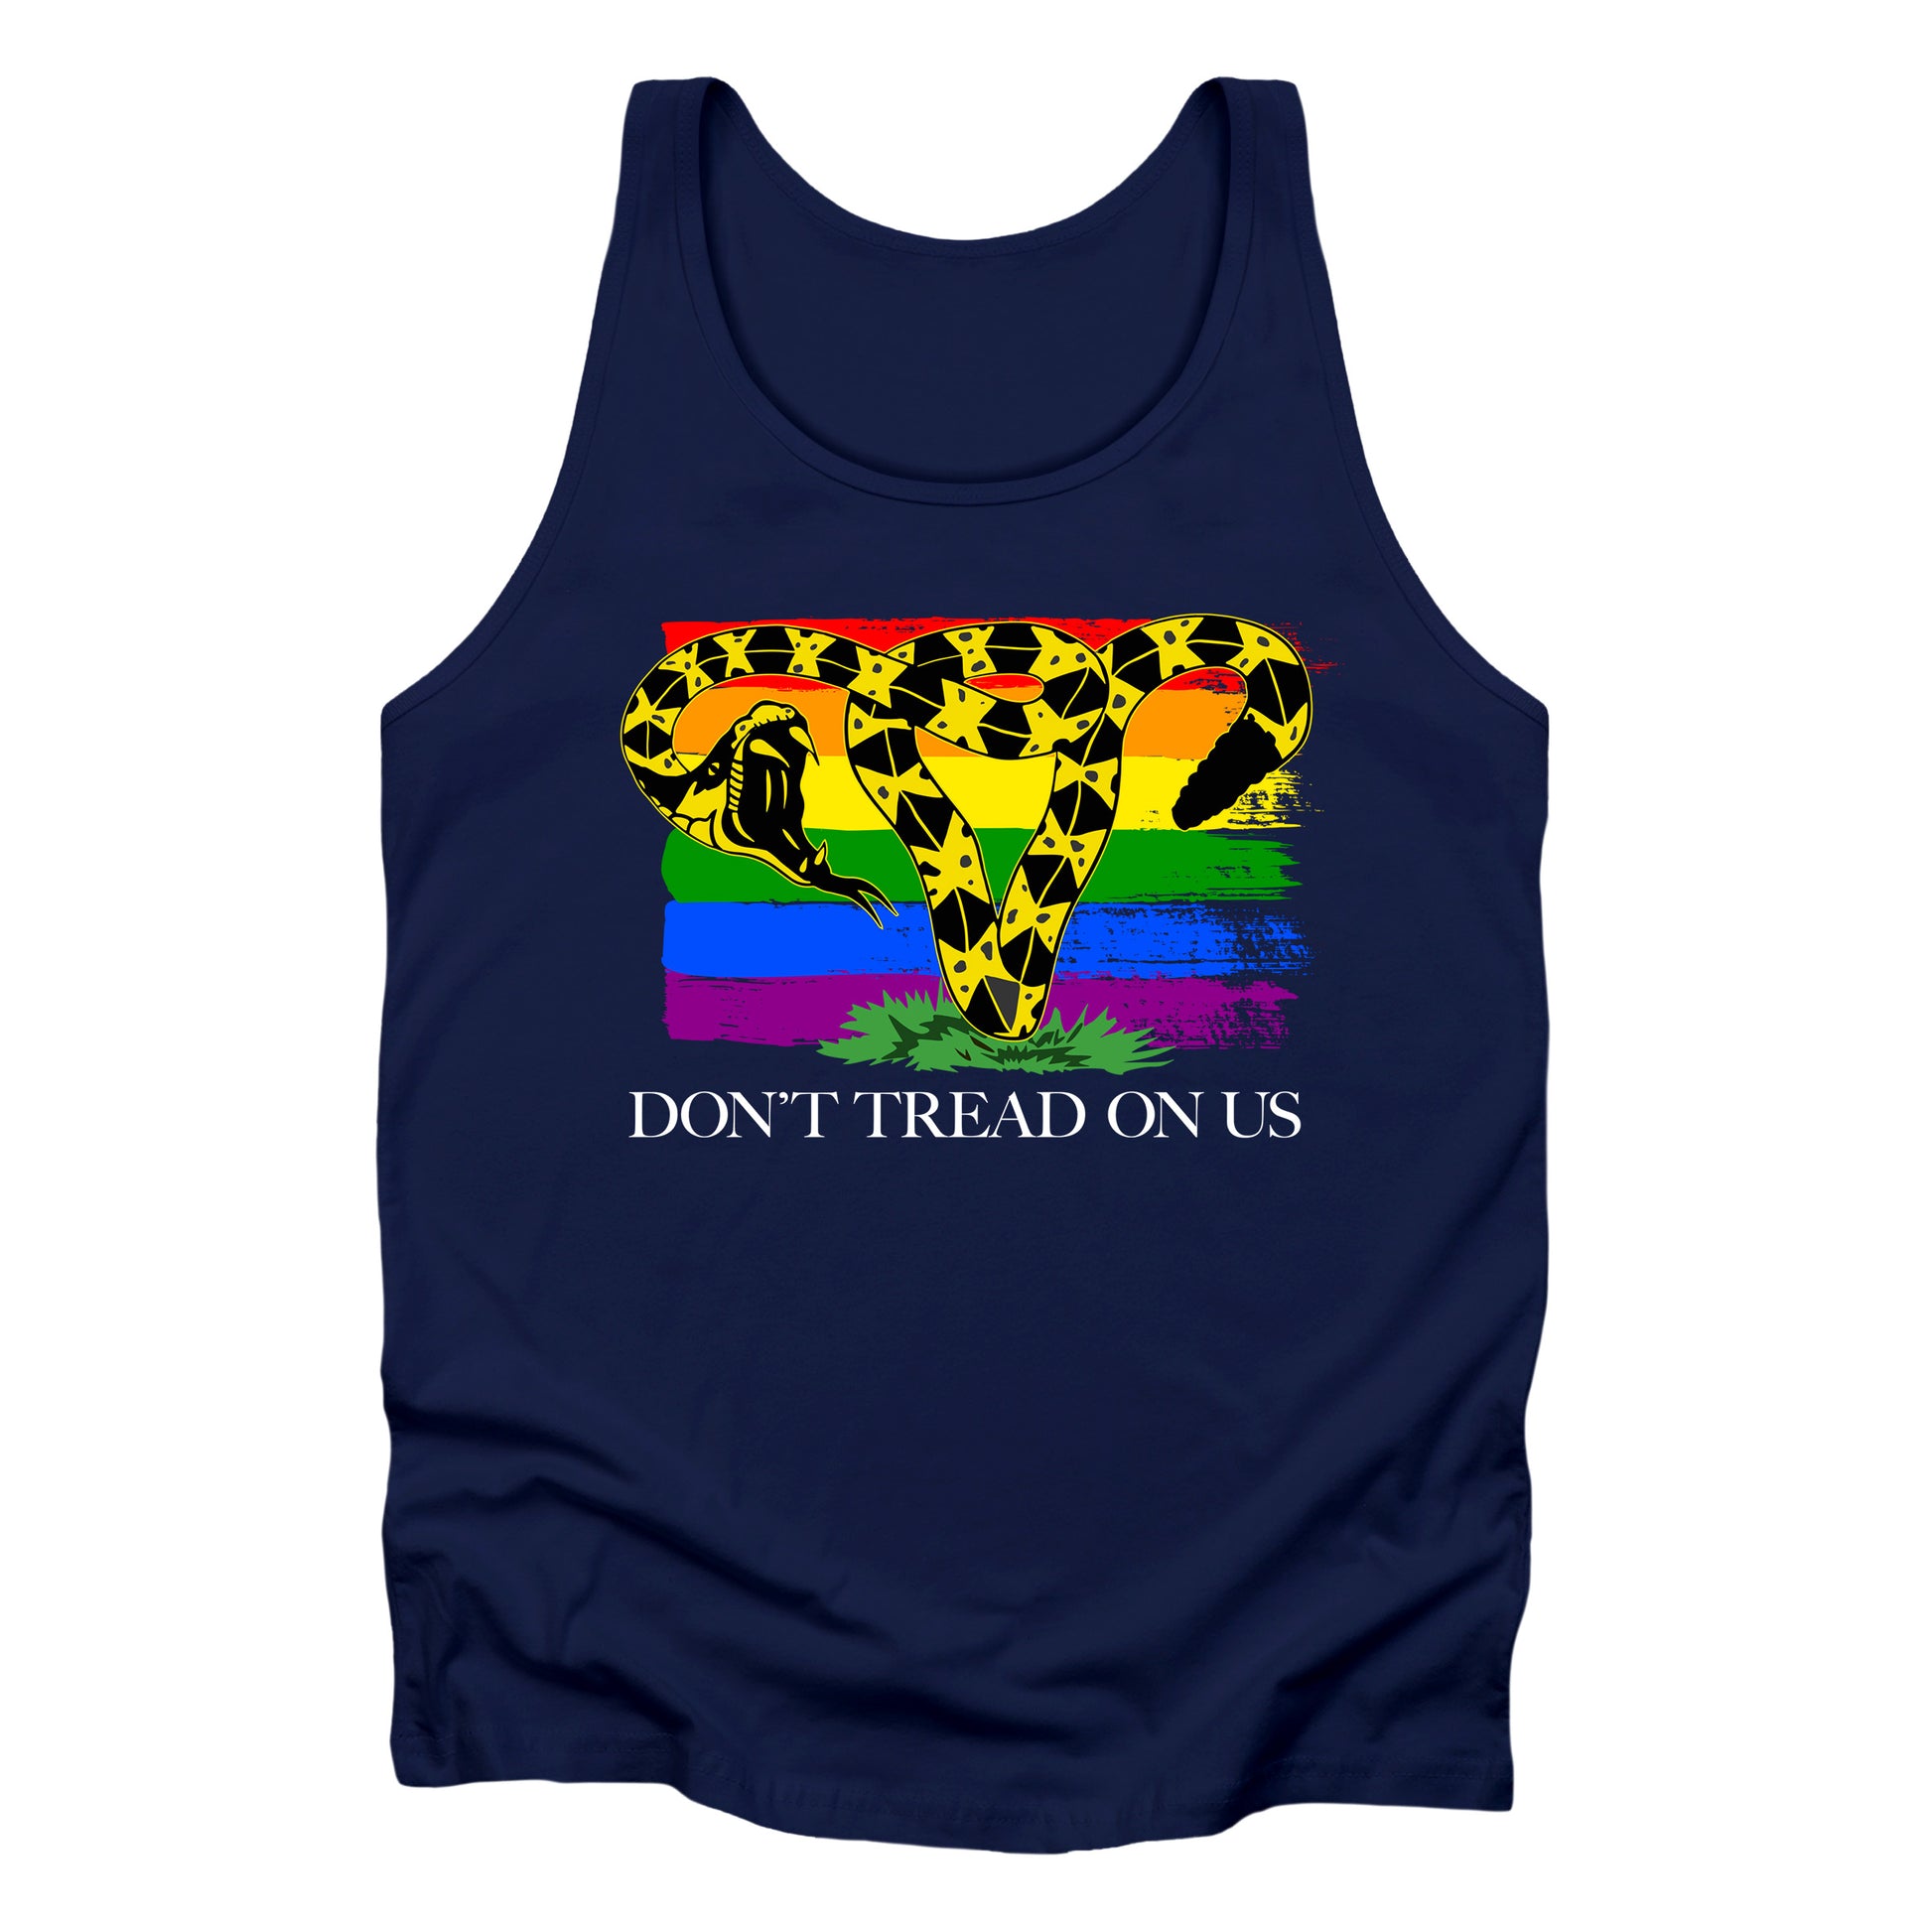 Navy blue unisex tank top with the “Don’t tread on me” snake redrawn into the shape of a uterus. A rainbow flag is painted in the background. Underneath the image reads “Don’t tread on us” in all caps.